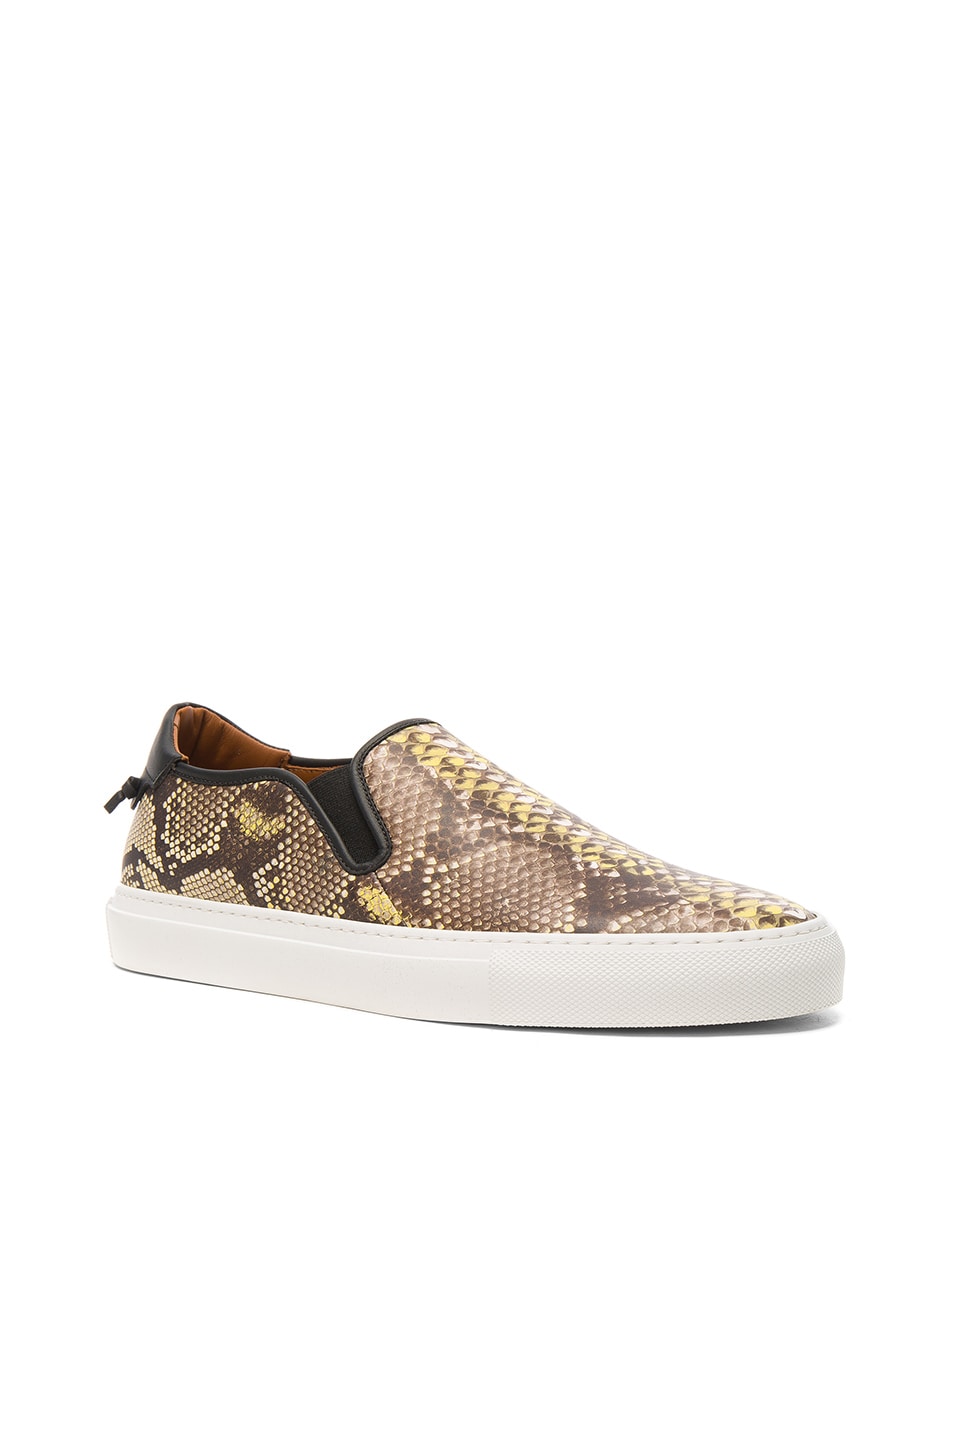 Image 1 of Givenchy Python Printed Slip On Printed Leather Sneakers in Natural